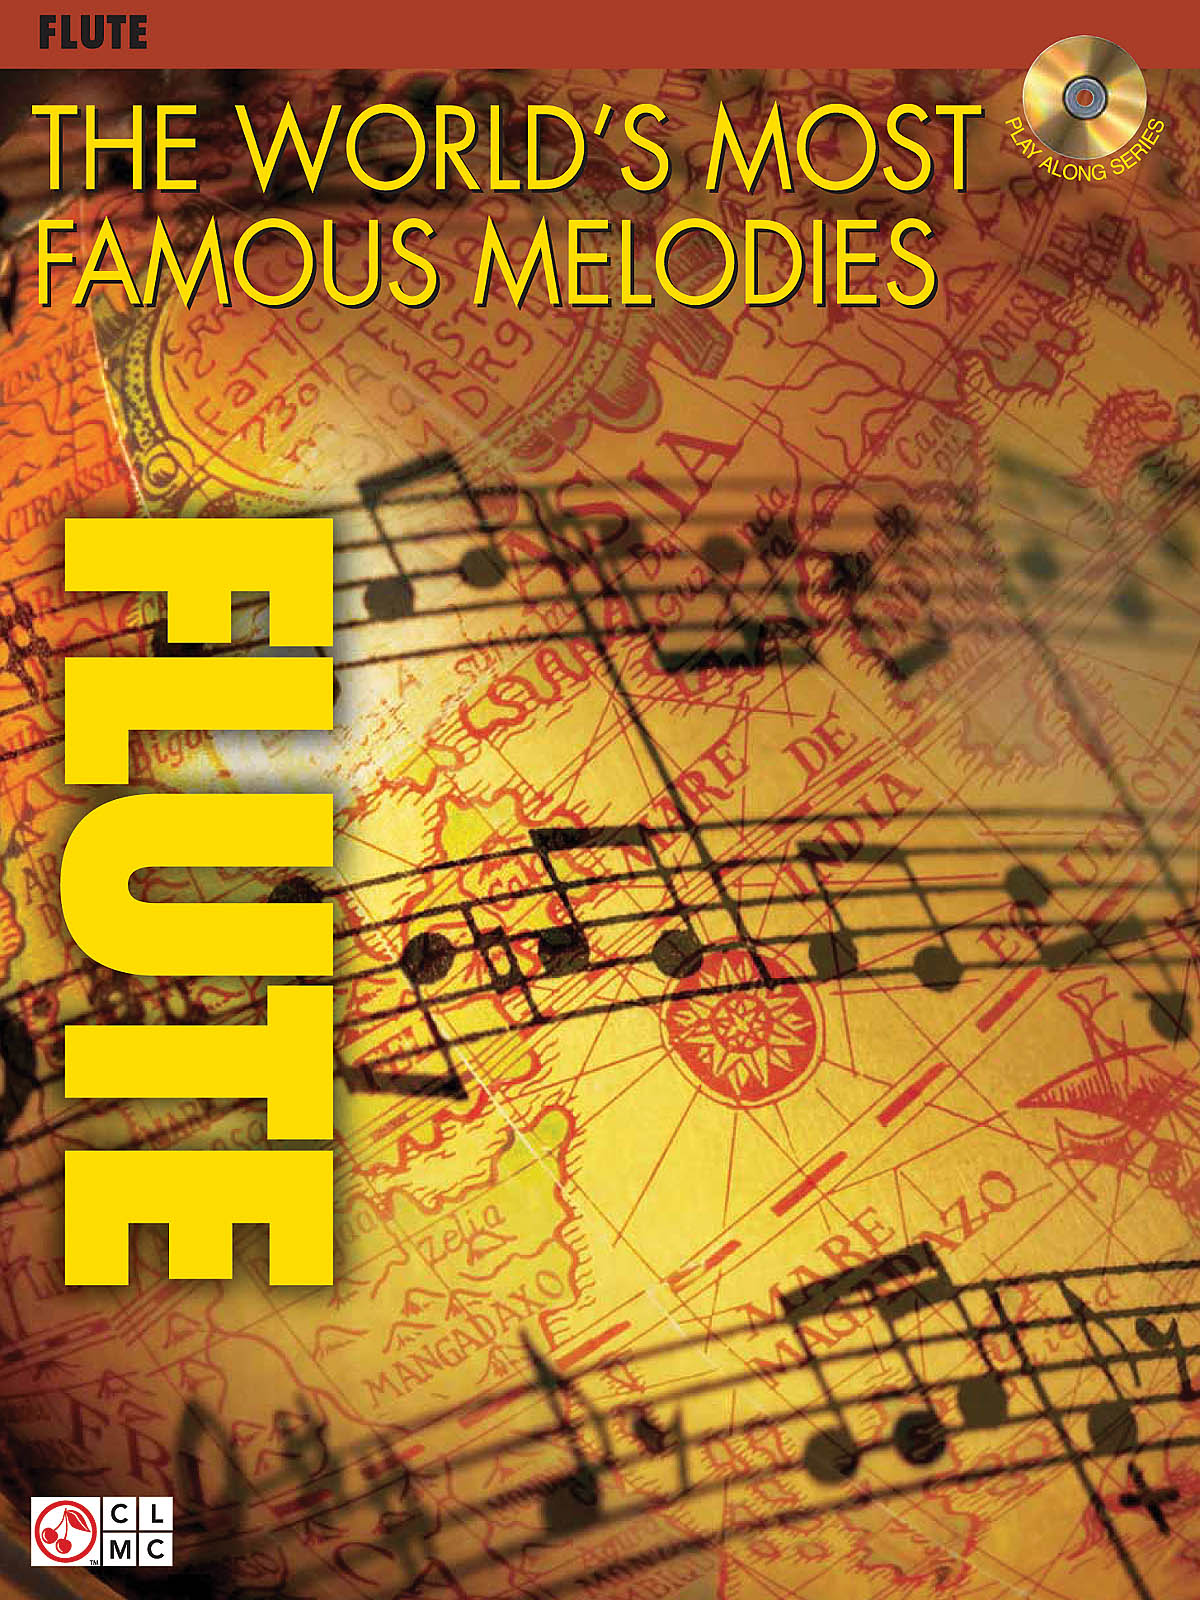 The World’s Most Famous Melodies